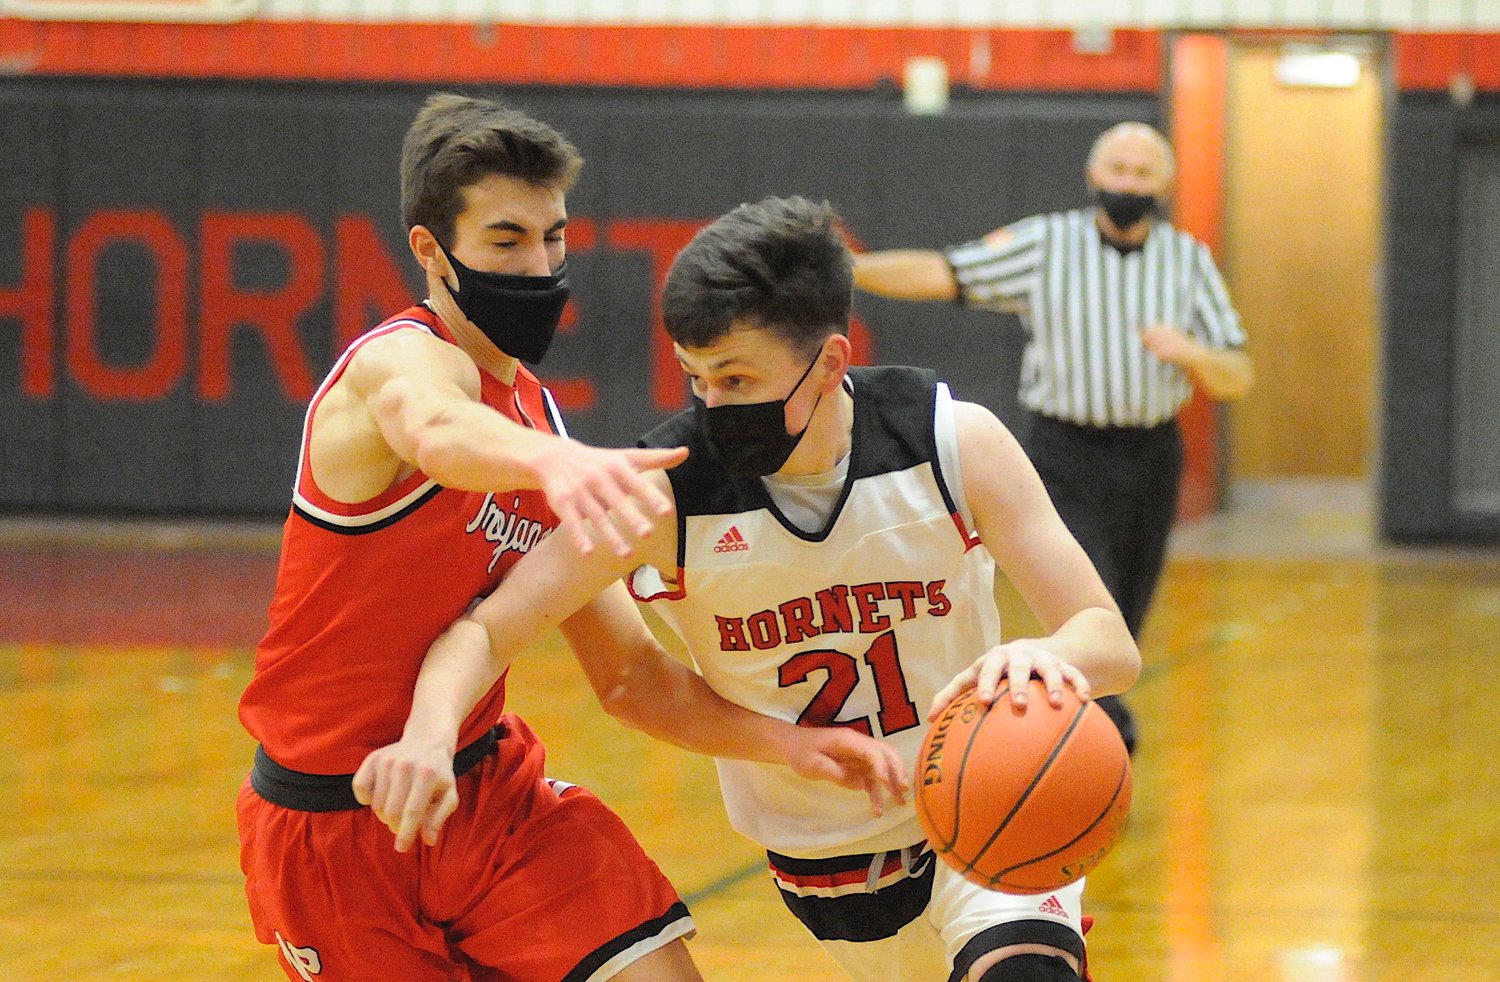 Not to be denied. Honesdale’s senior Connor Coar sprints to the paint, as Matt Kowalski defends for the Trojans.